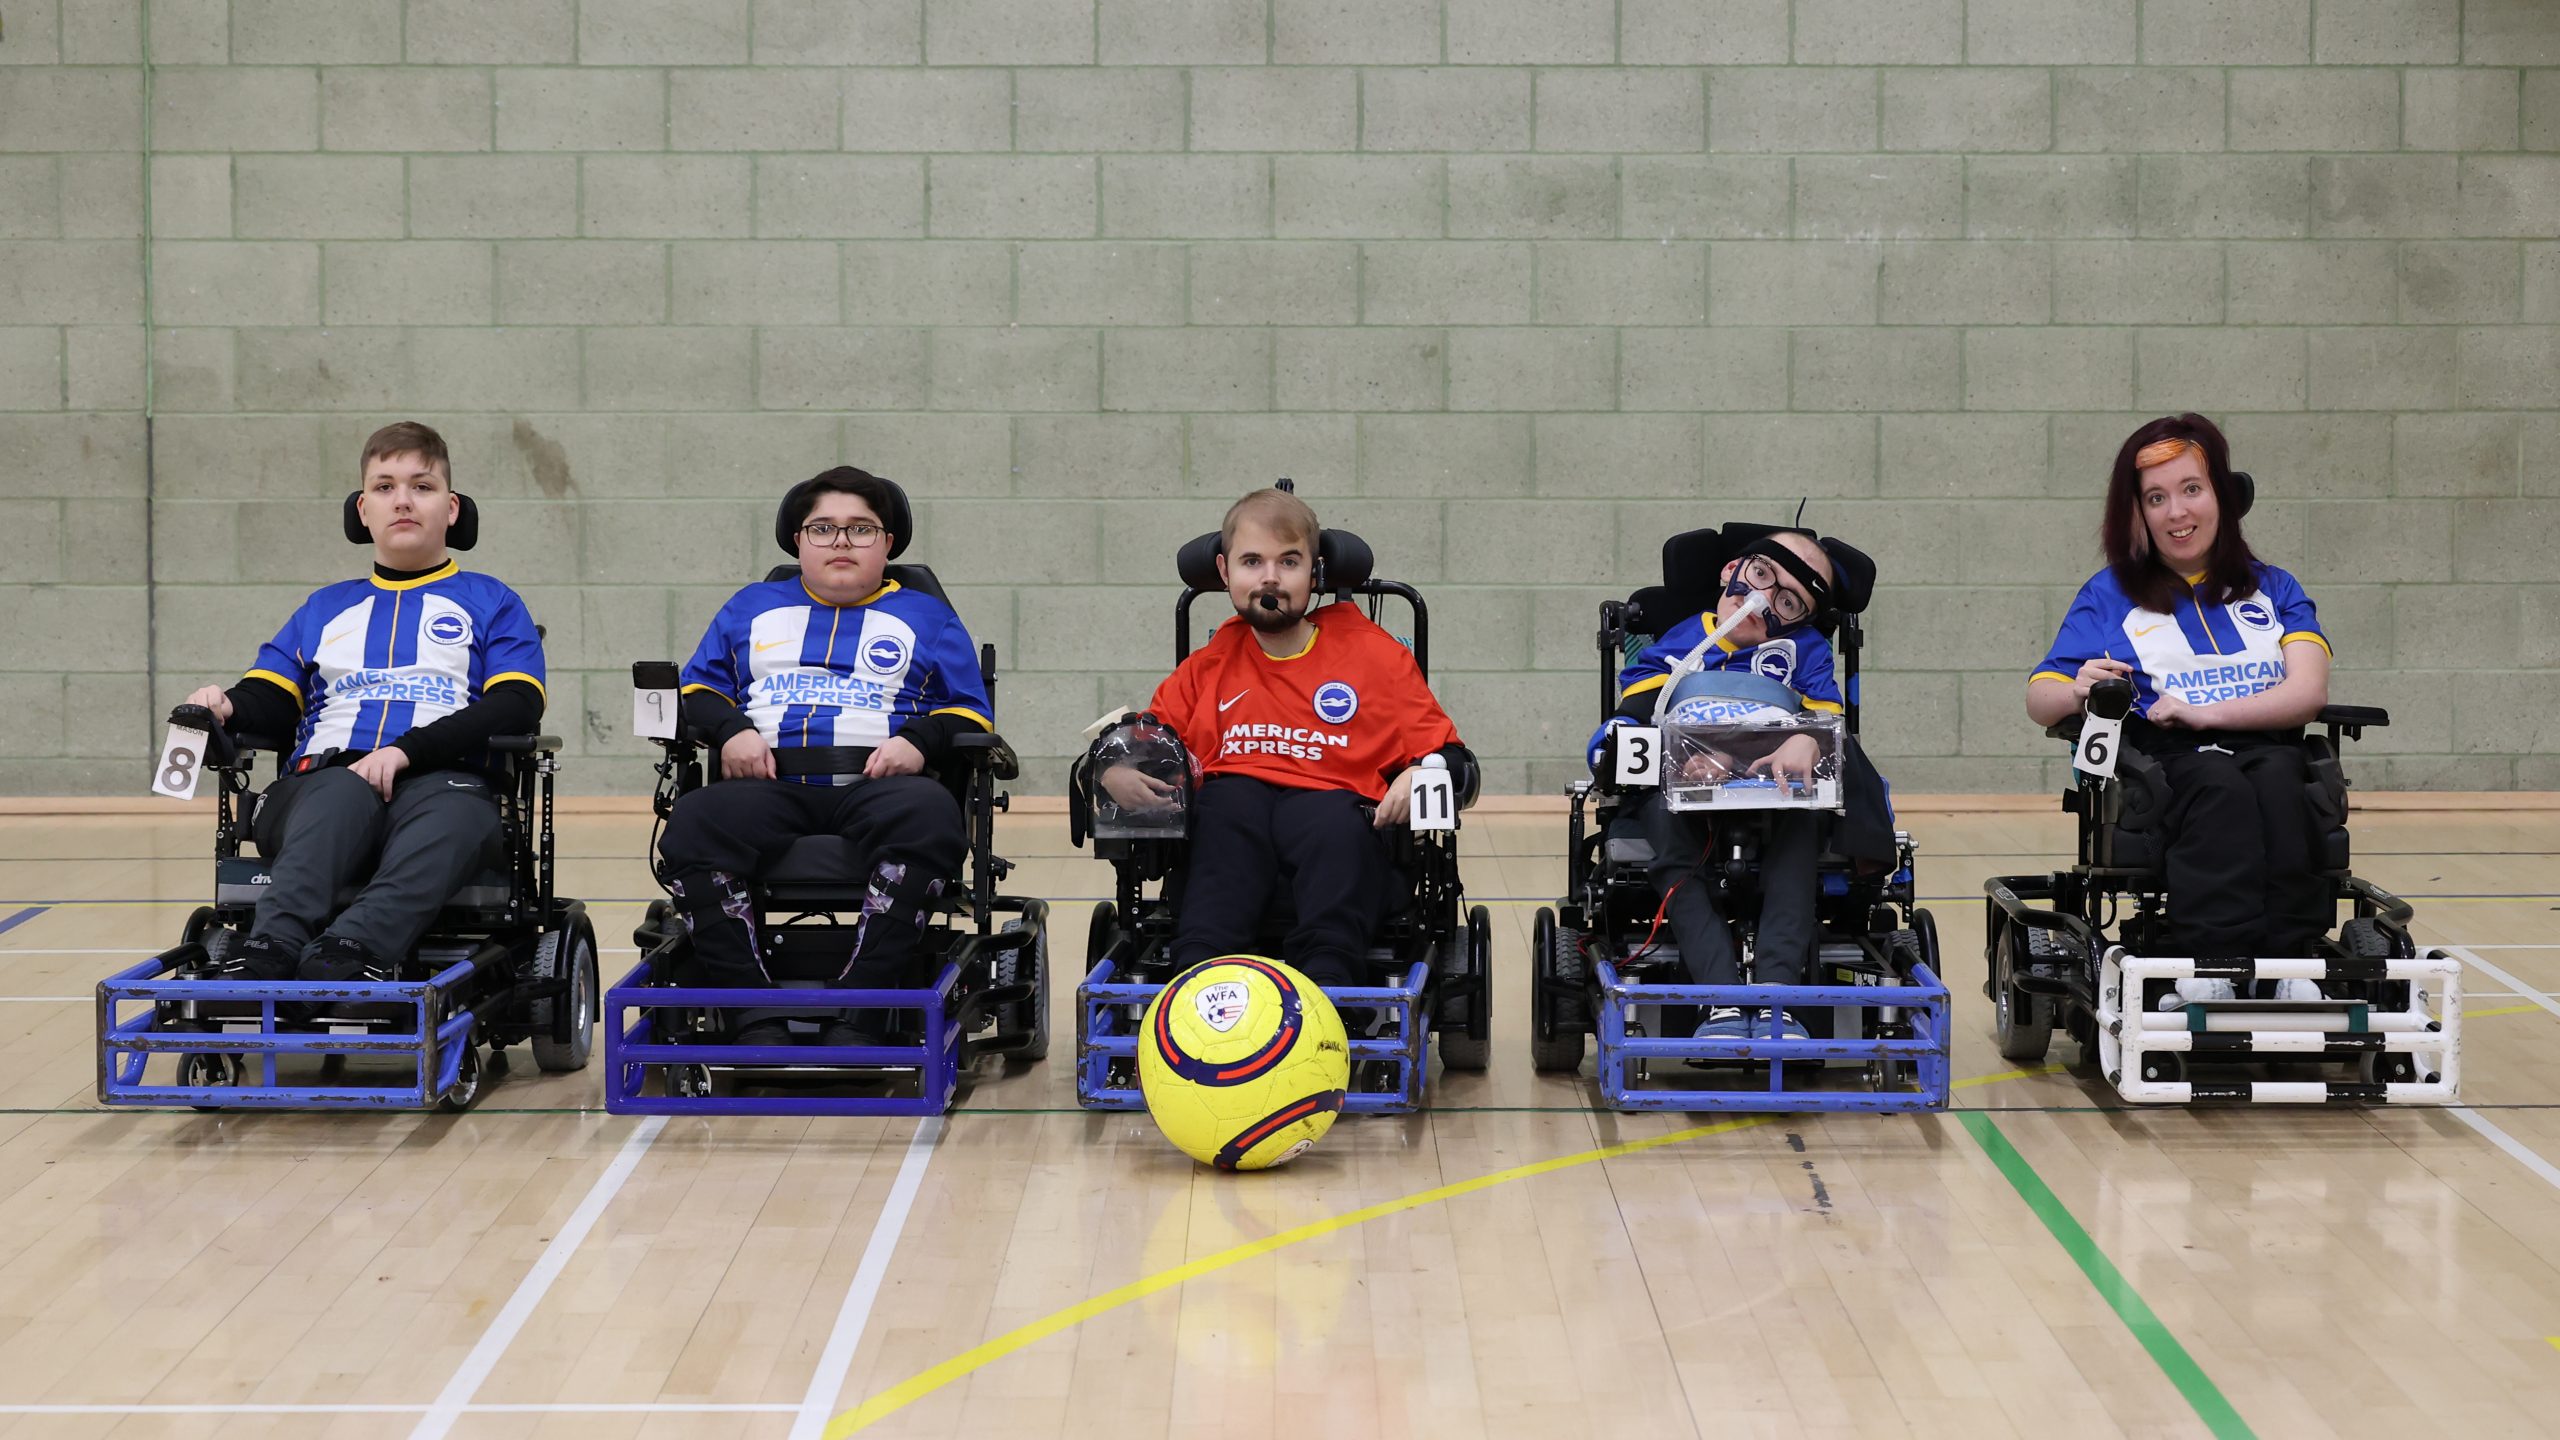 Brand new chairs for Powerchair team after £12k appeal